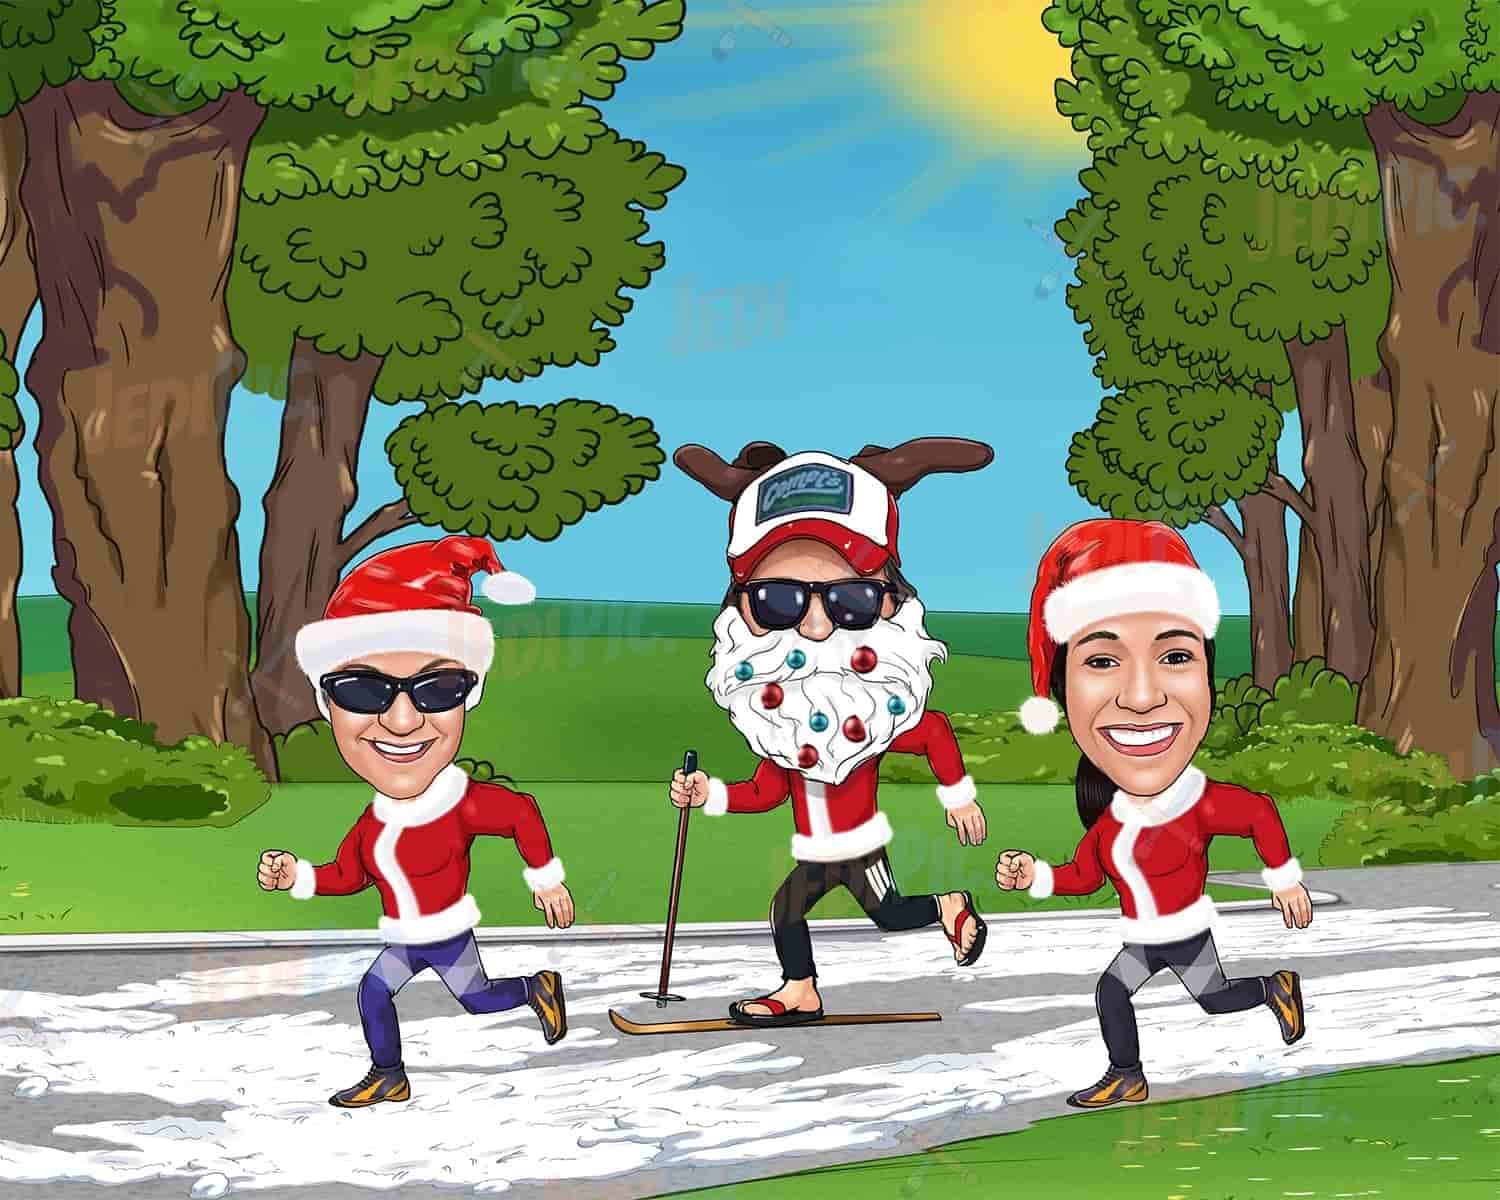 Group Christmas Caricature in Santa Clothes